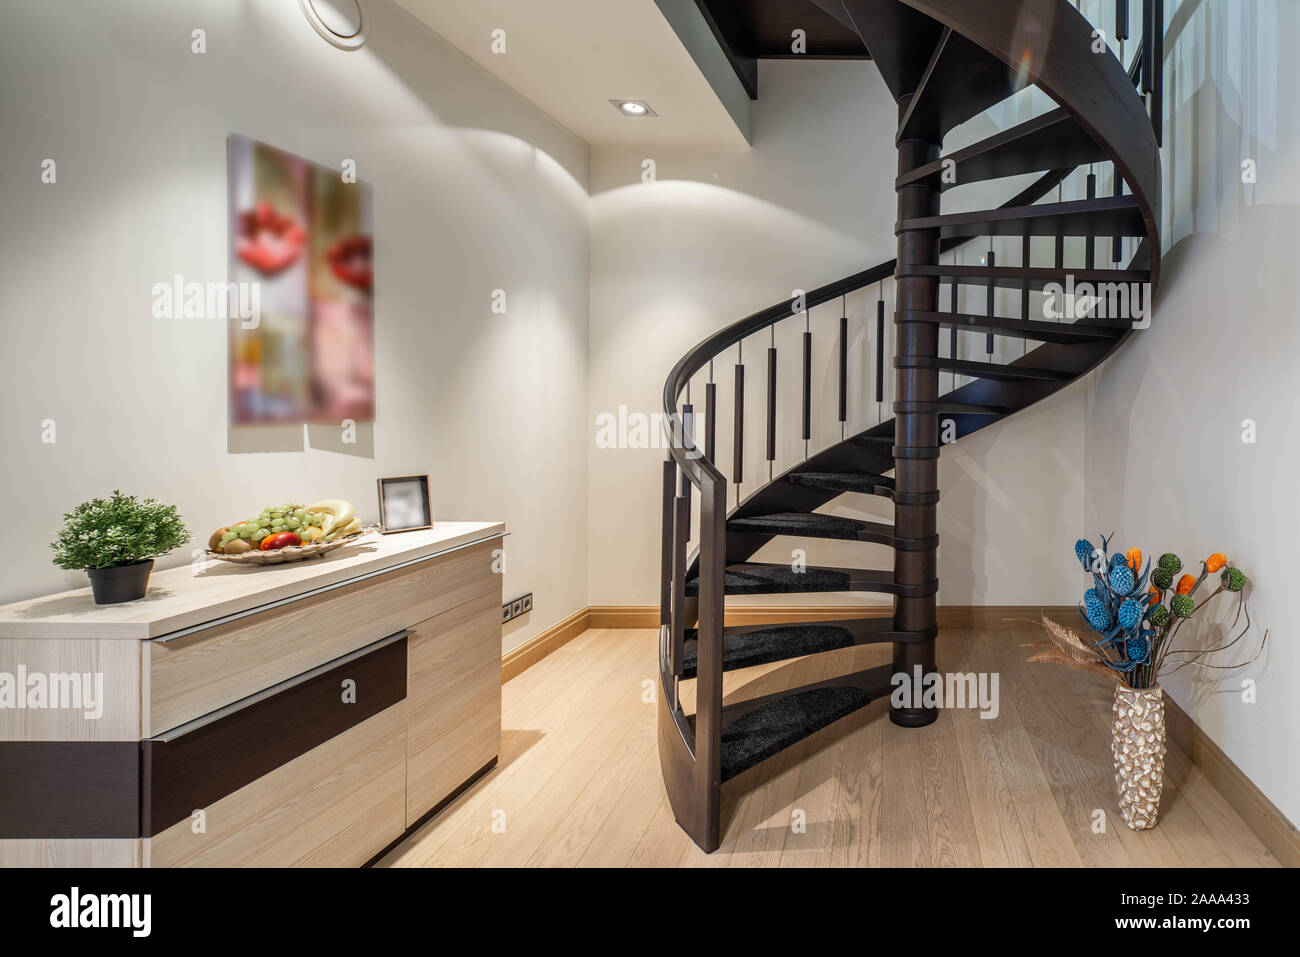 Modern Interior Of Studio Apartment Stairs To The Second Floor